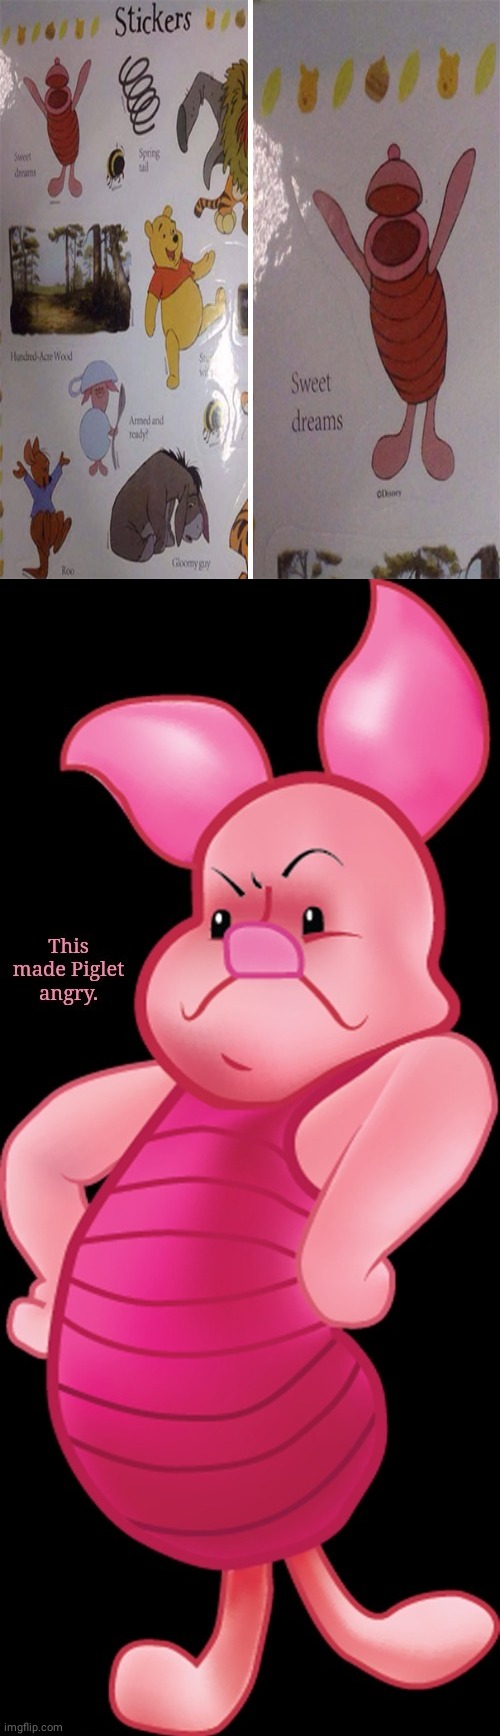 Piglet design fail | image tagged in this made piglet angry,piglet,you had one job,memes,meme,winnie the pooh | made w/ Imgflip meme maker